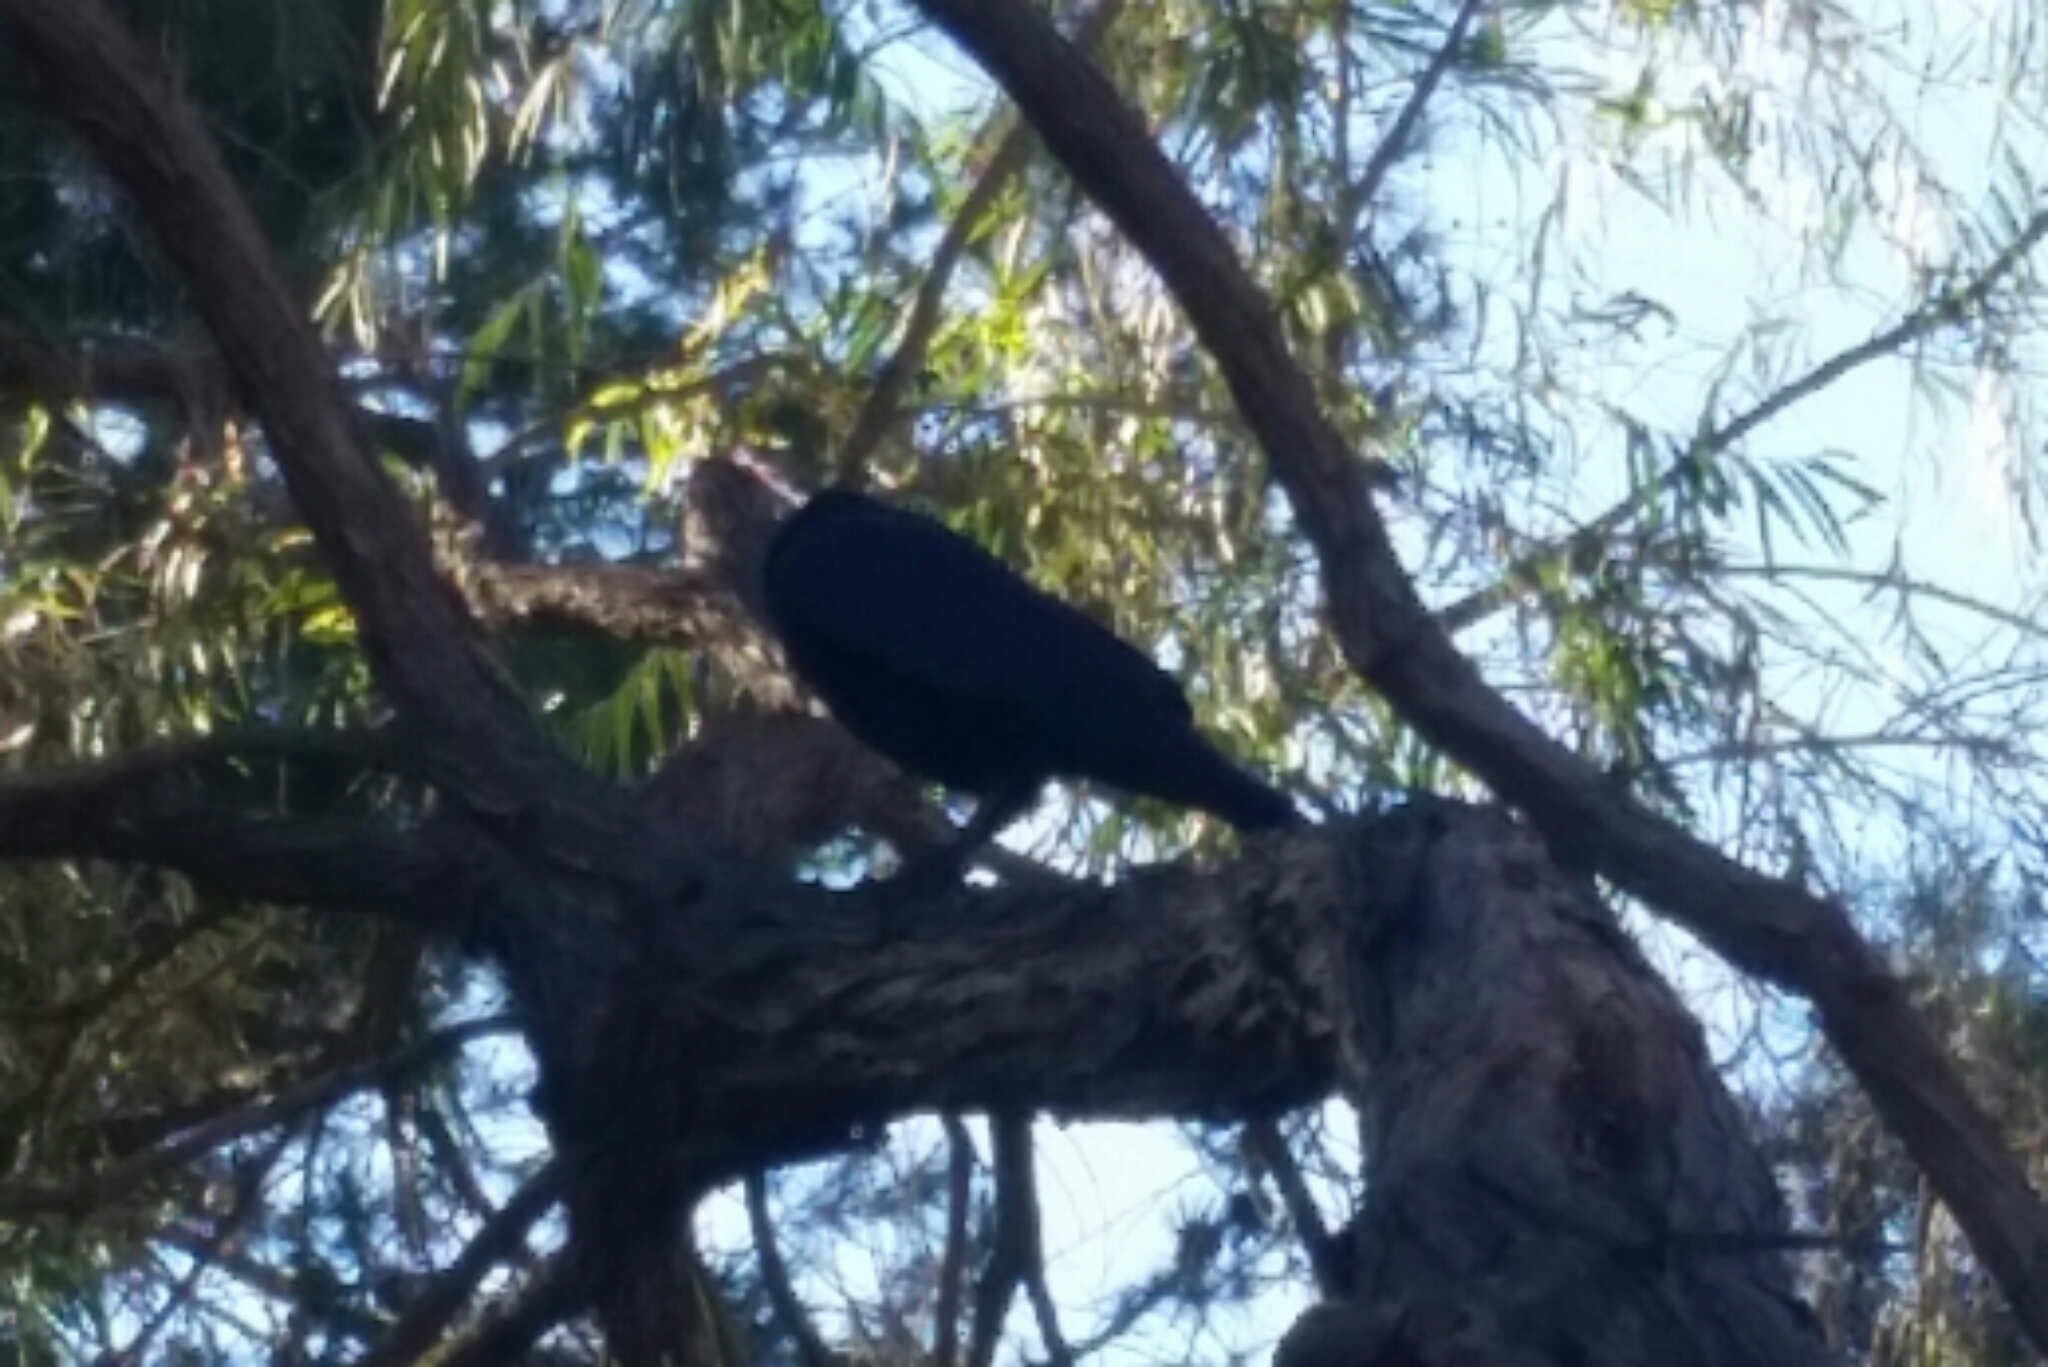 Image of American crow